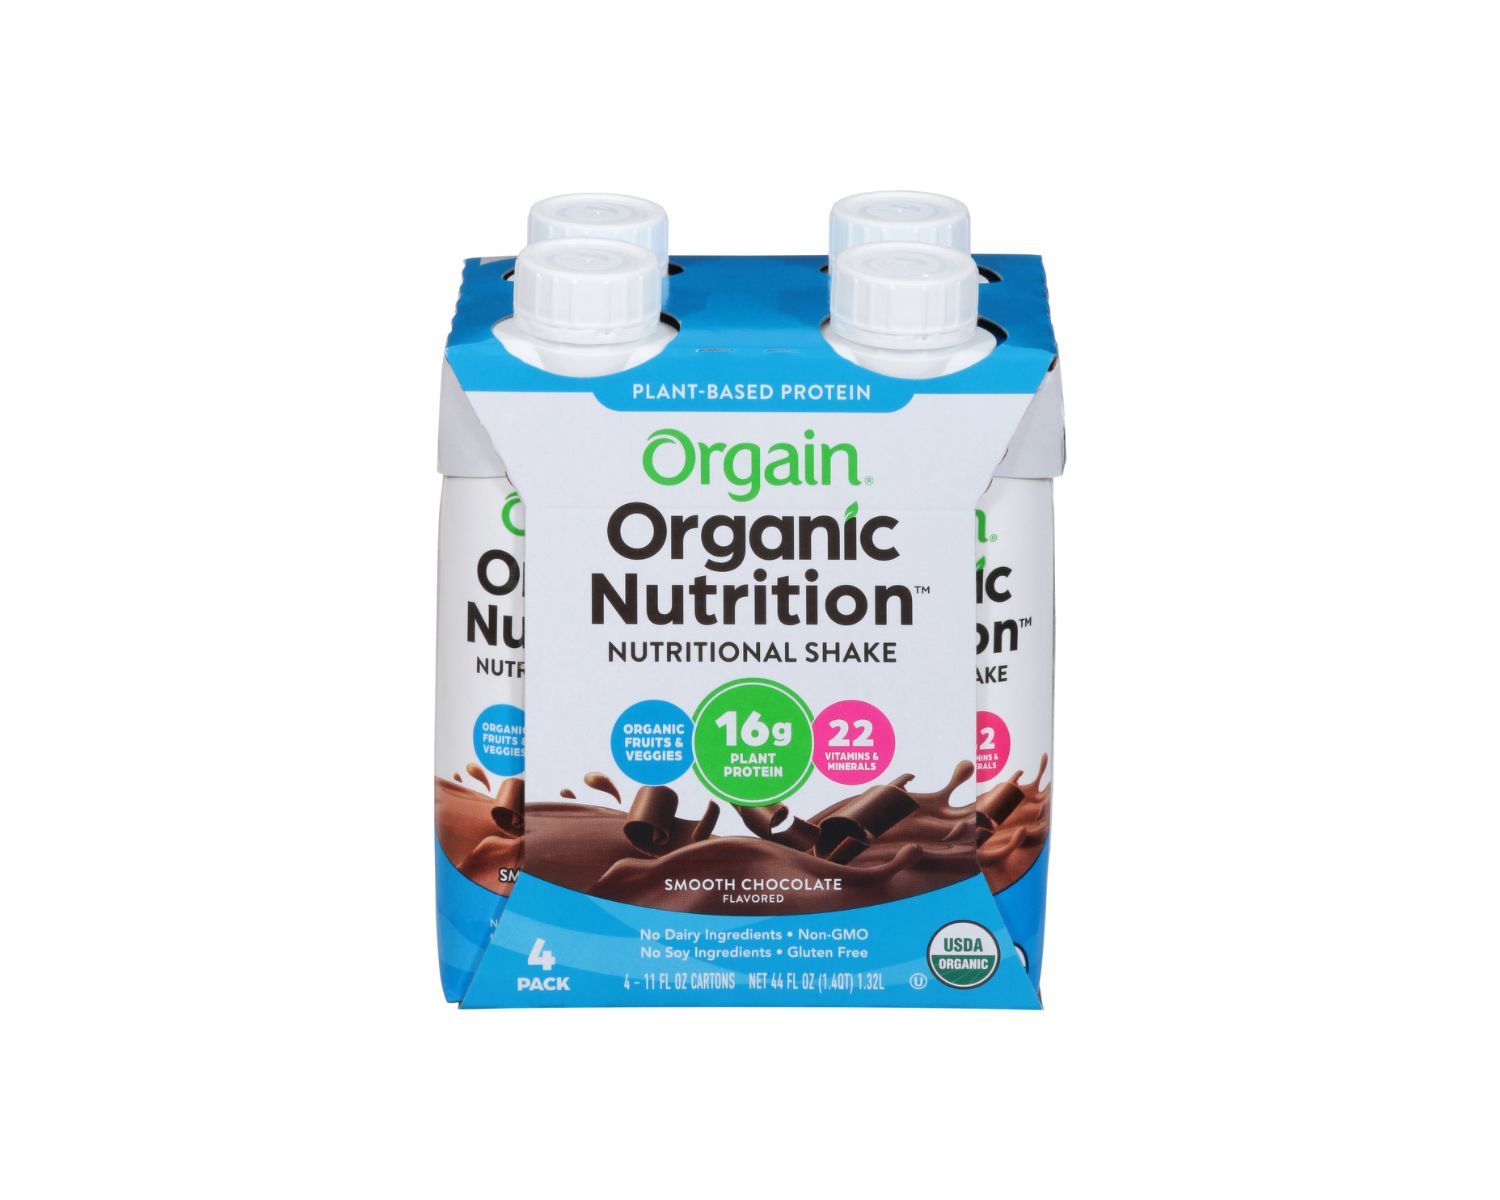 https://facts.net/wp-content/uploads/2023/11/18-orgain-organic-protein-shake-nutrition-facts-1700980652.jpg